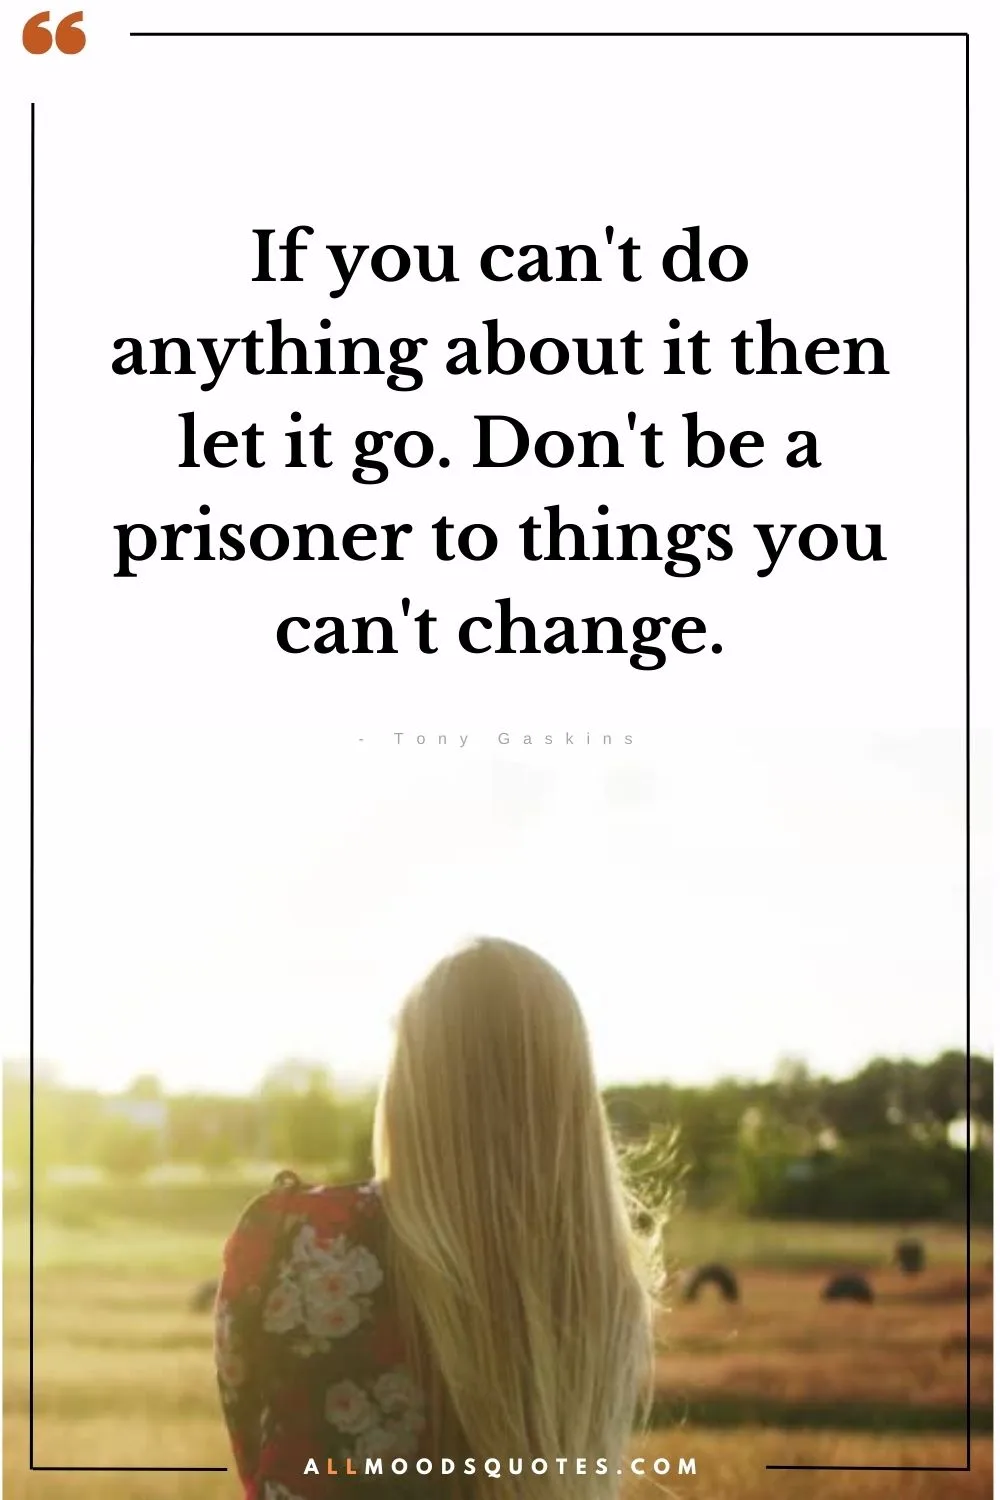 If You Can'T Do Anything About It Then Let It Go - Quotes